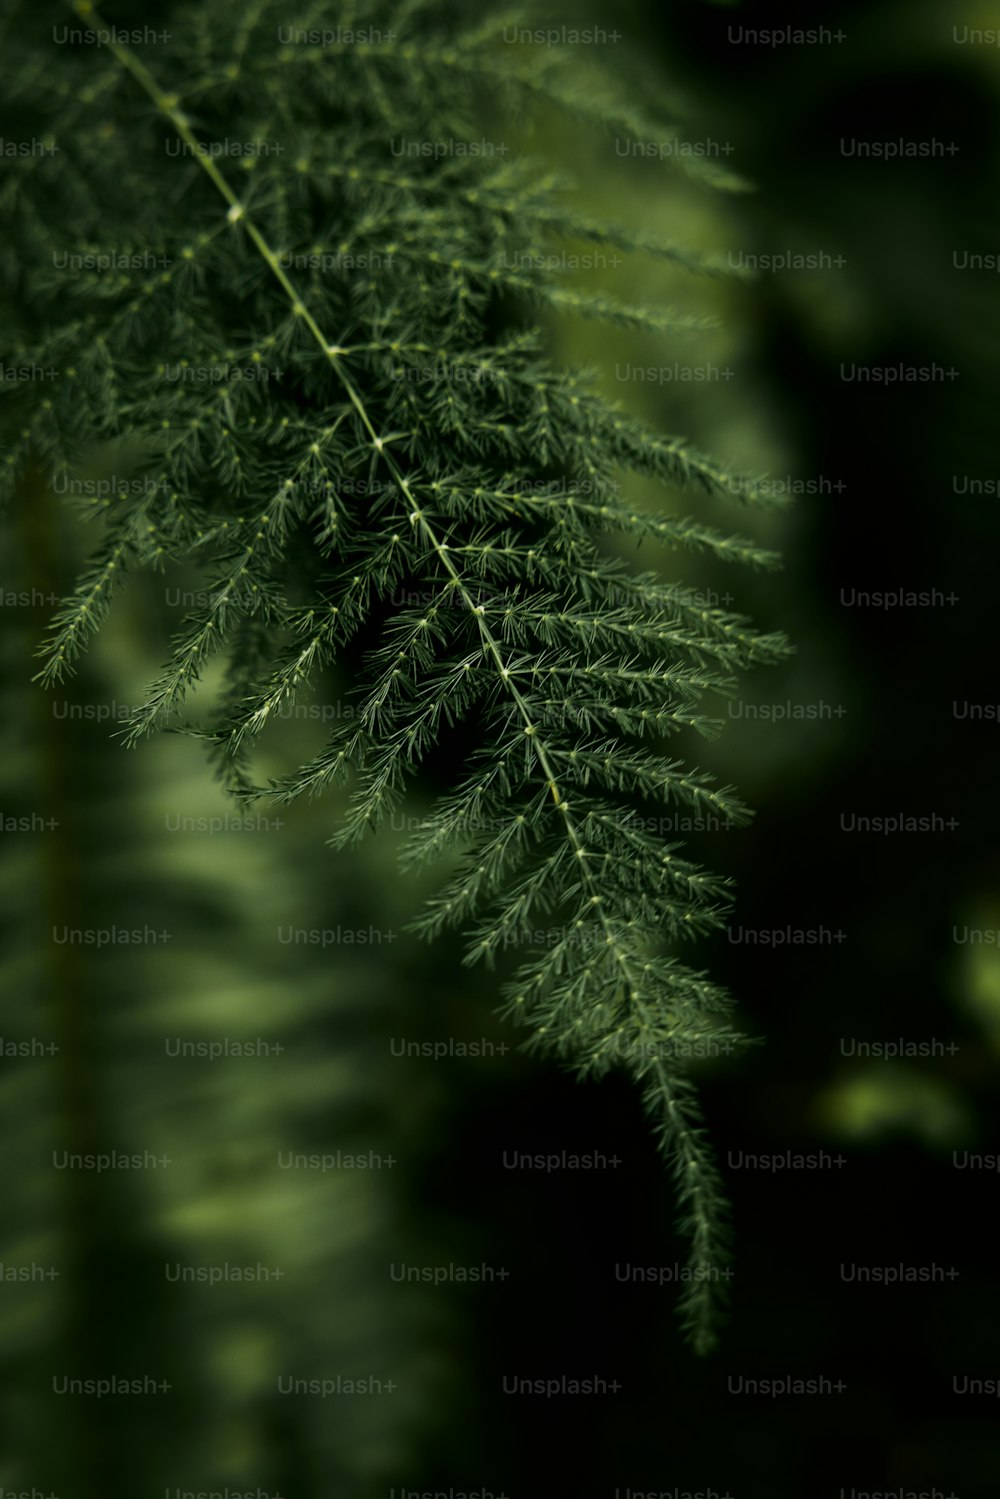 a close up of a green plant with a blurry background